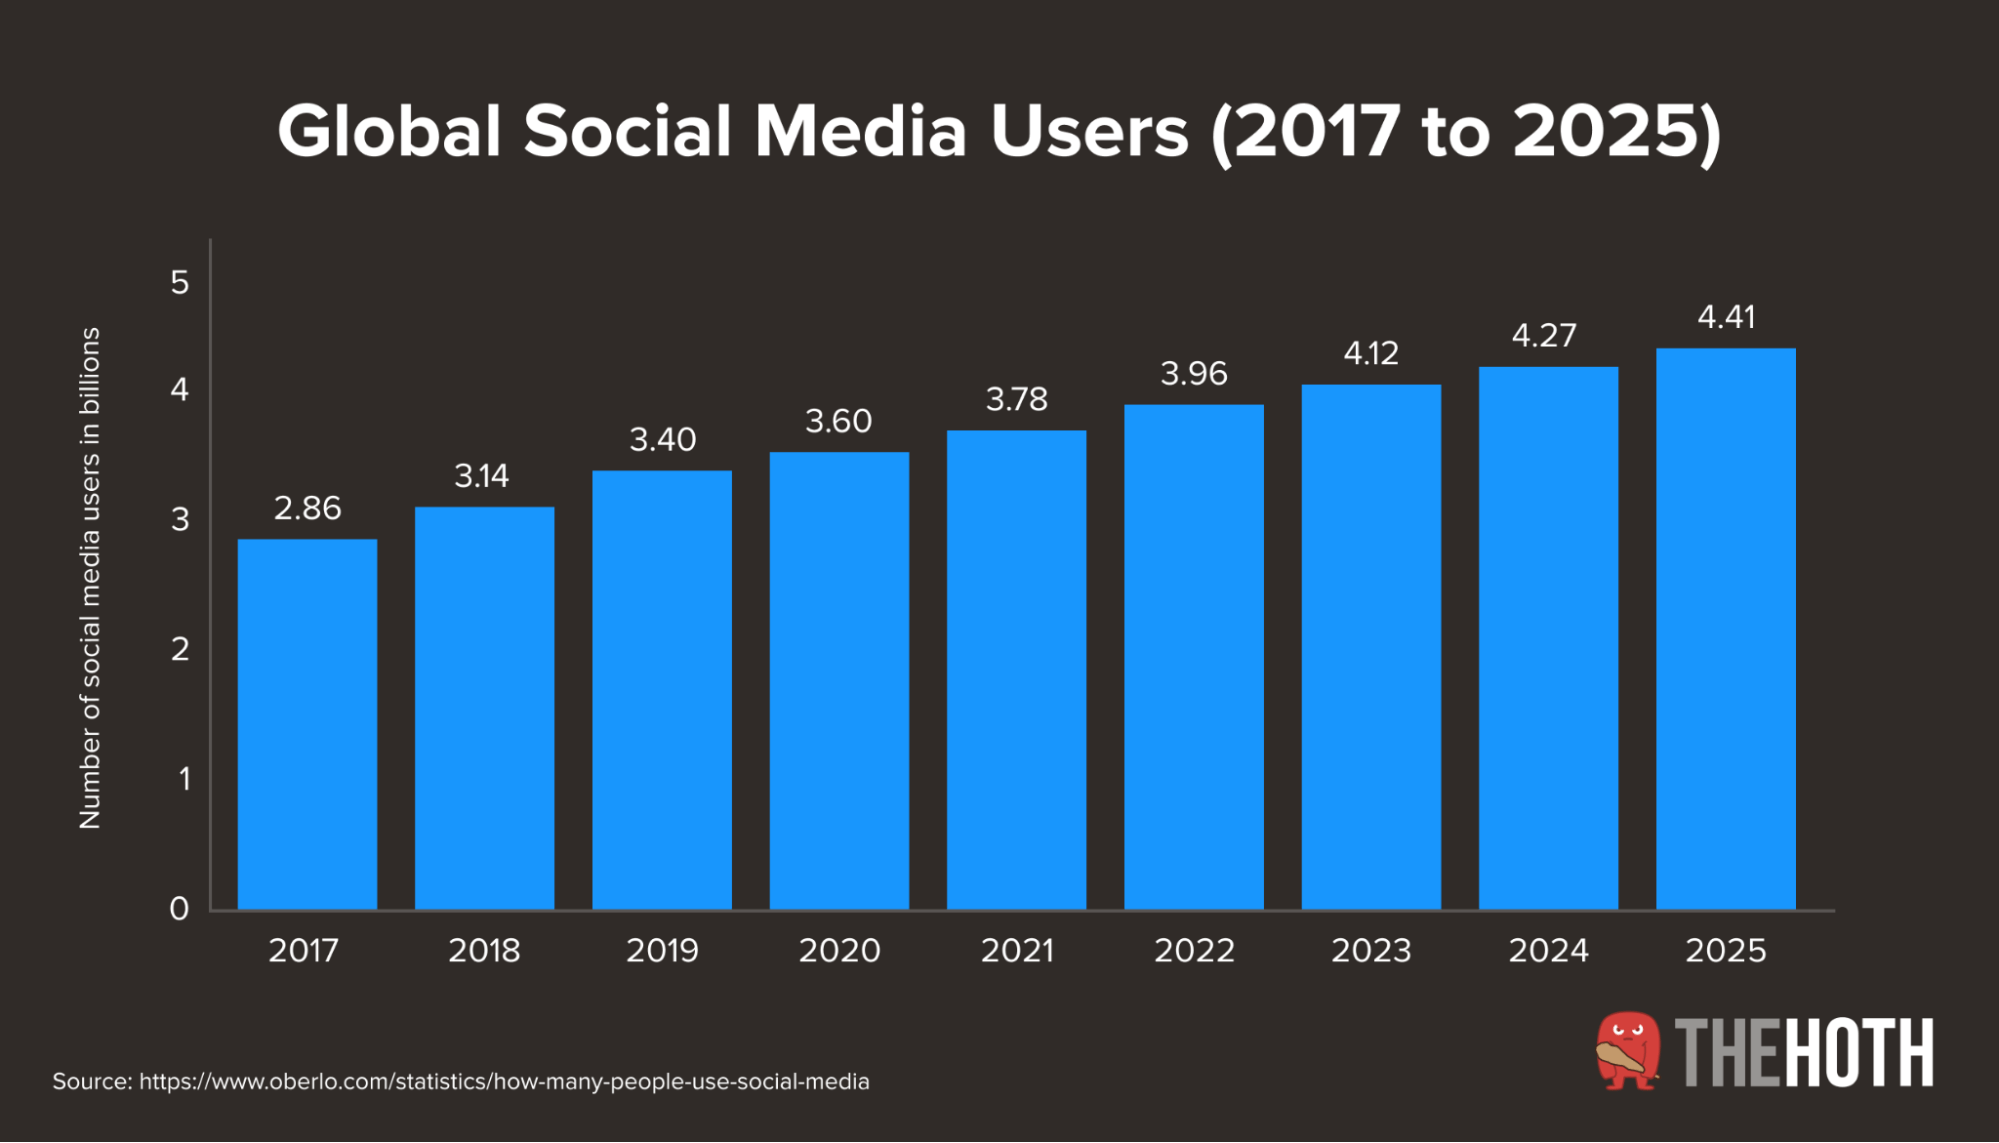 Projected social media users through 2025